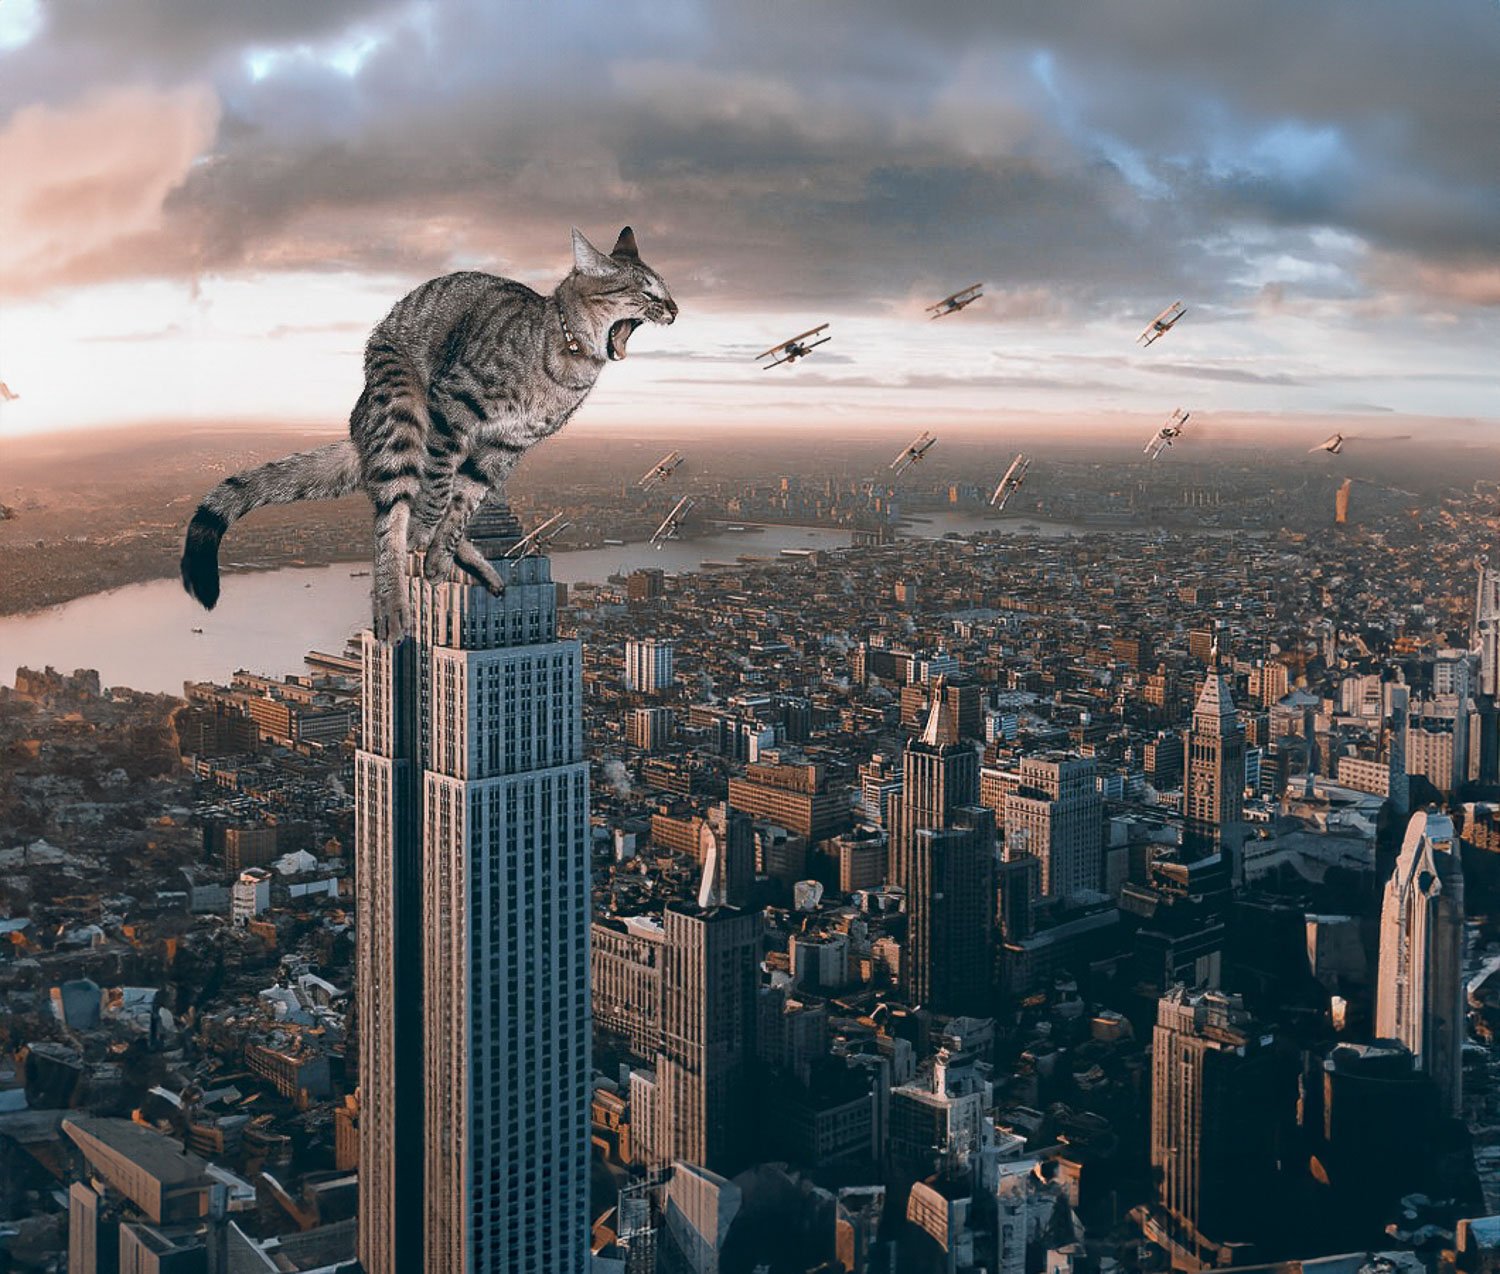 A giant grey cat sitting on top of the Empire State building surrounded by vintage airplanes